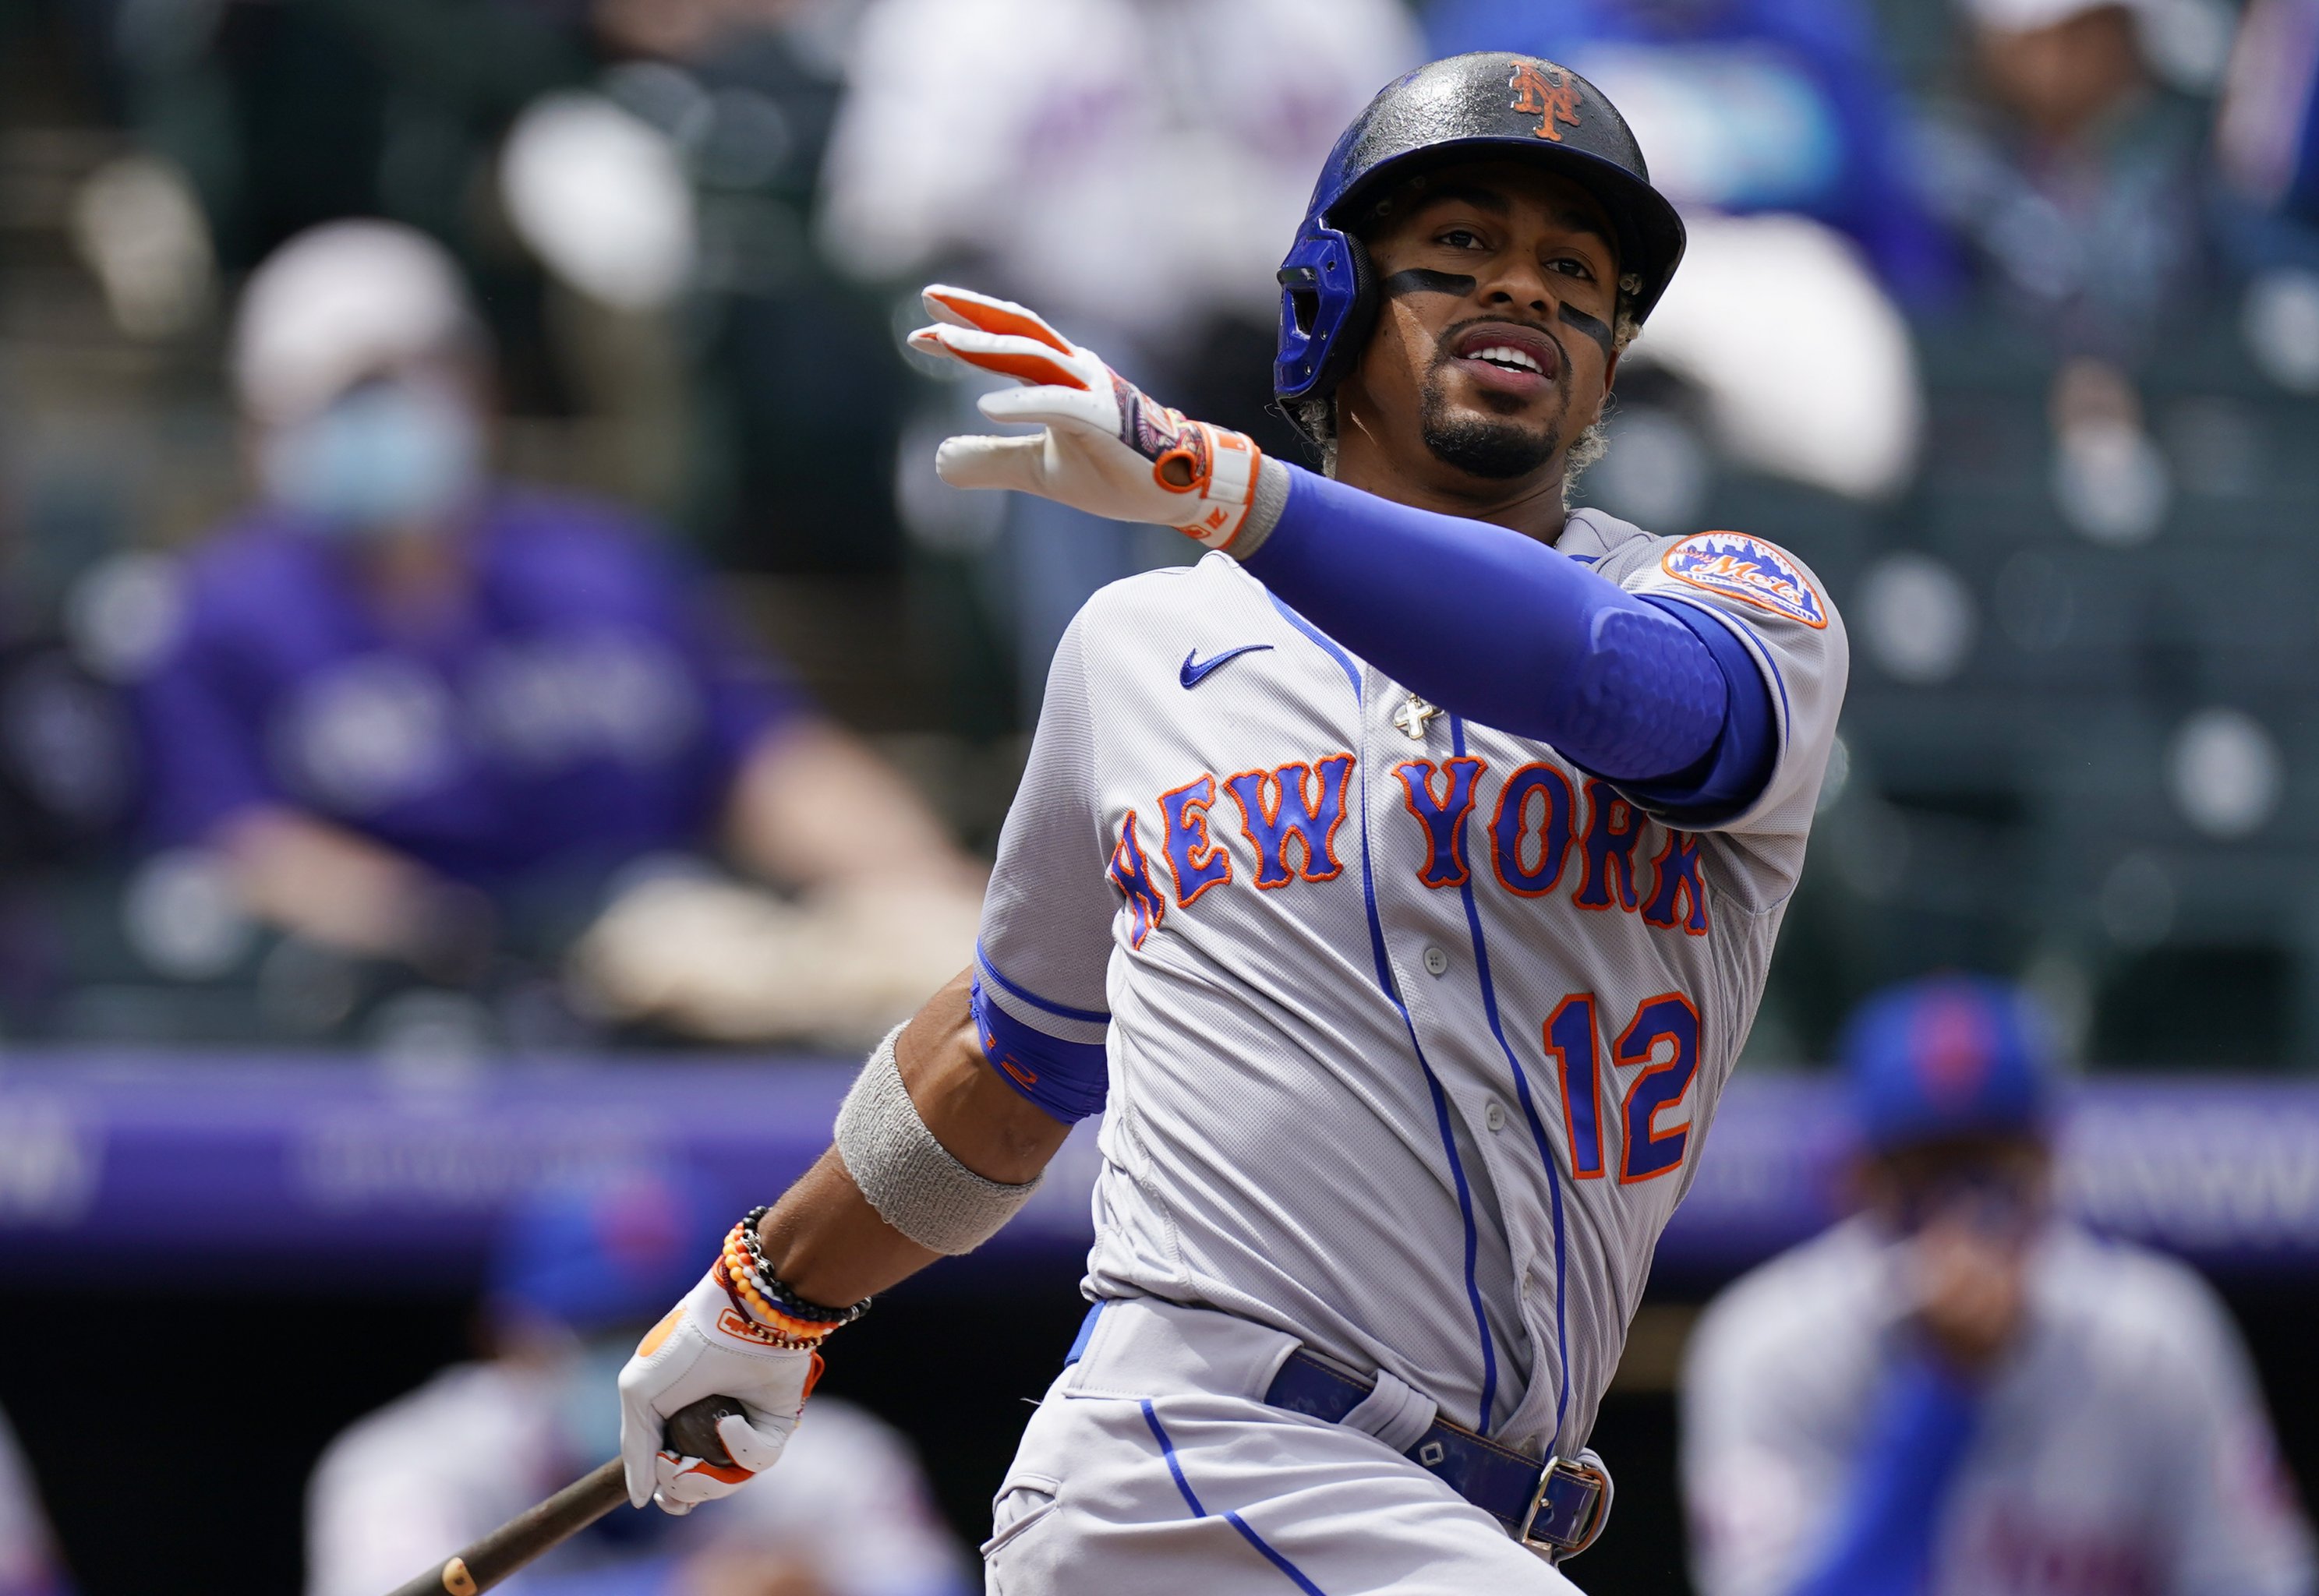 Mets' Francisco Lindor busts out of slump with homer, 3-hit game